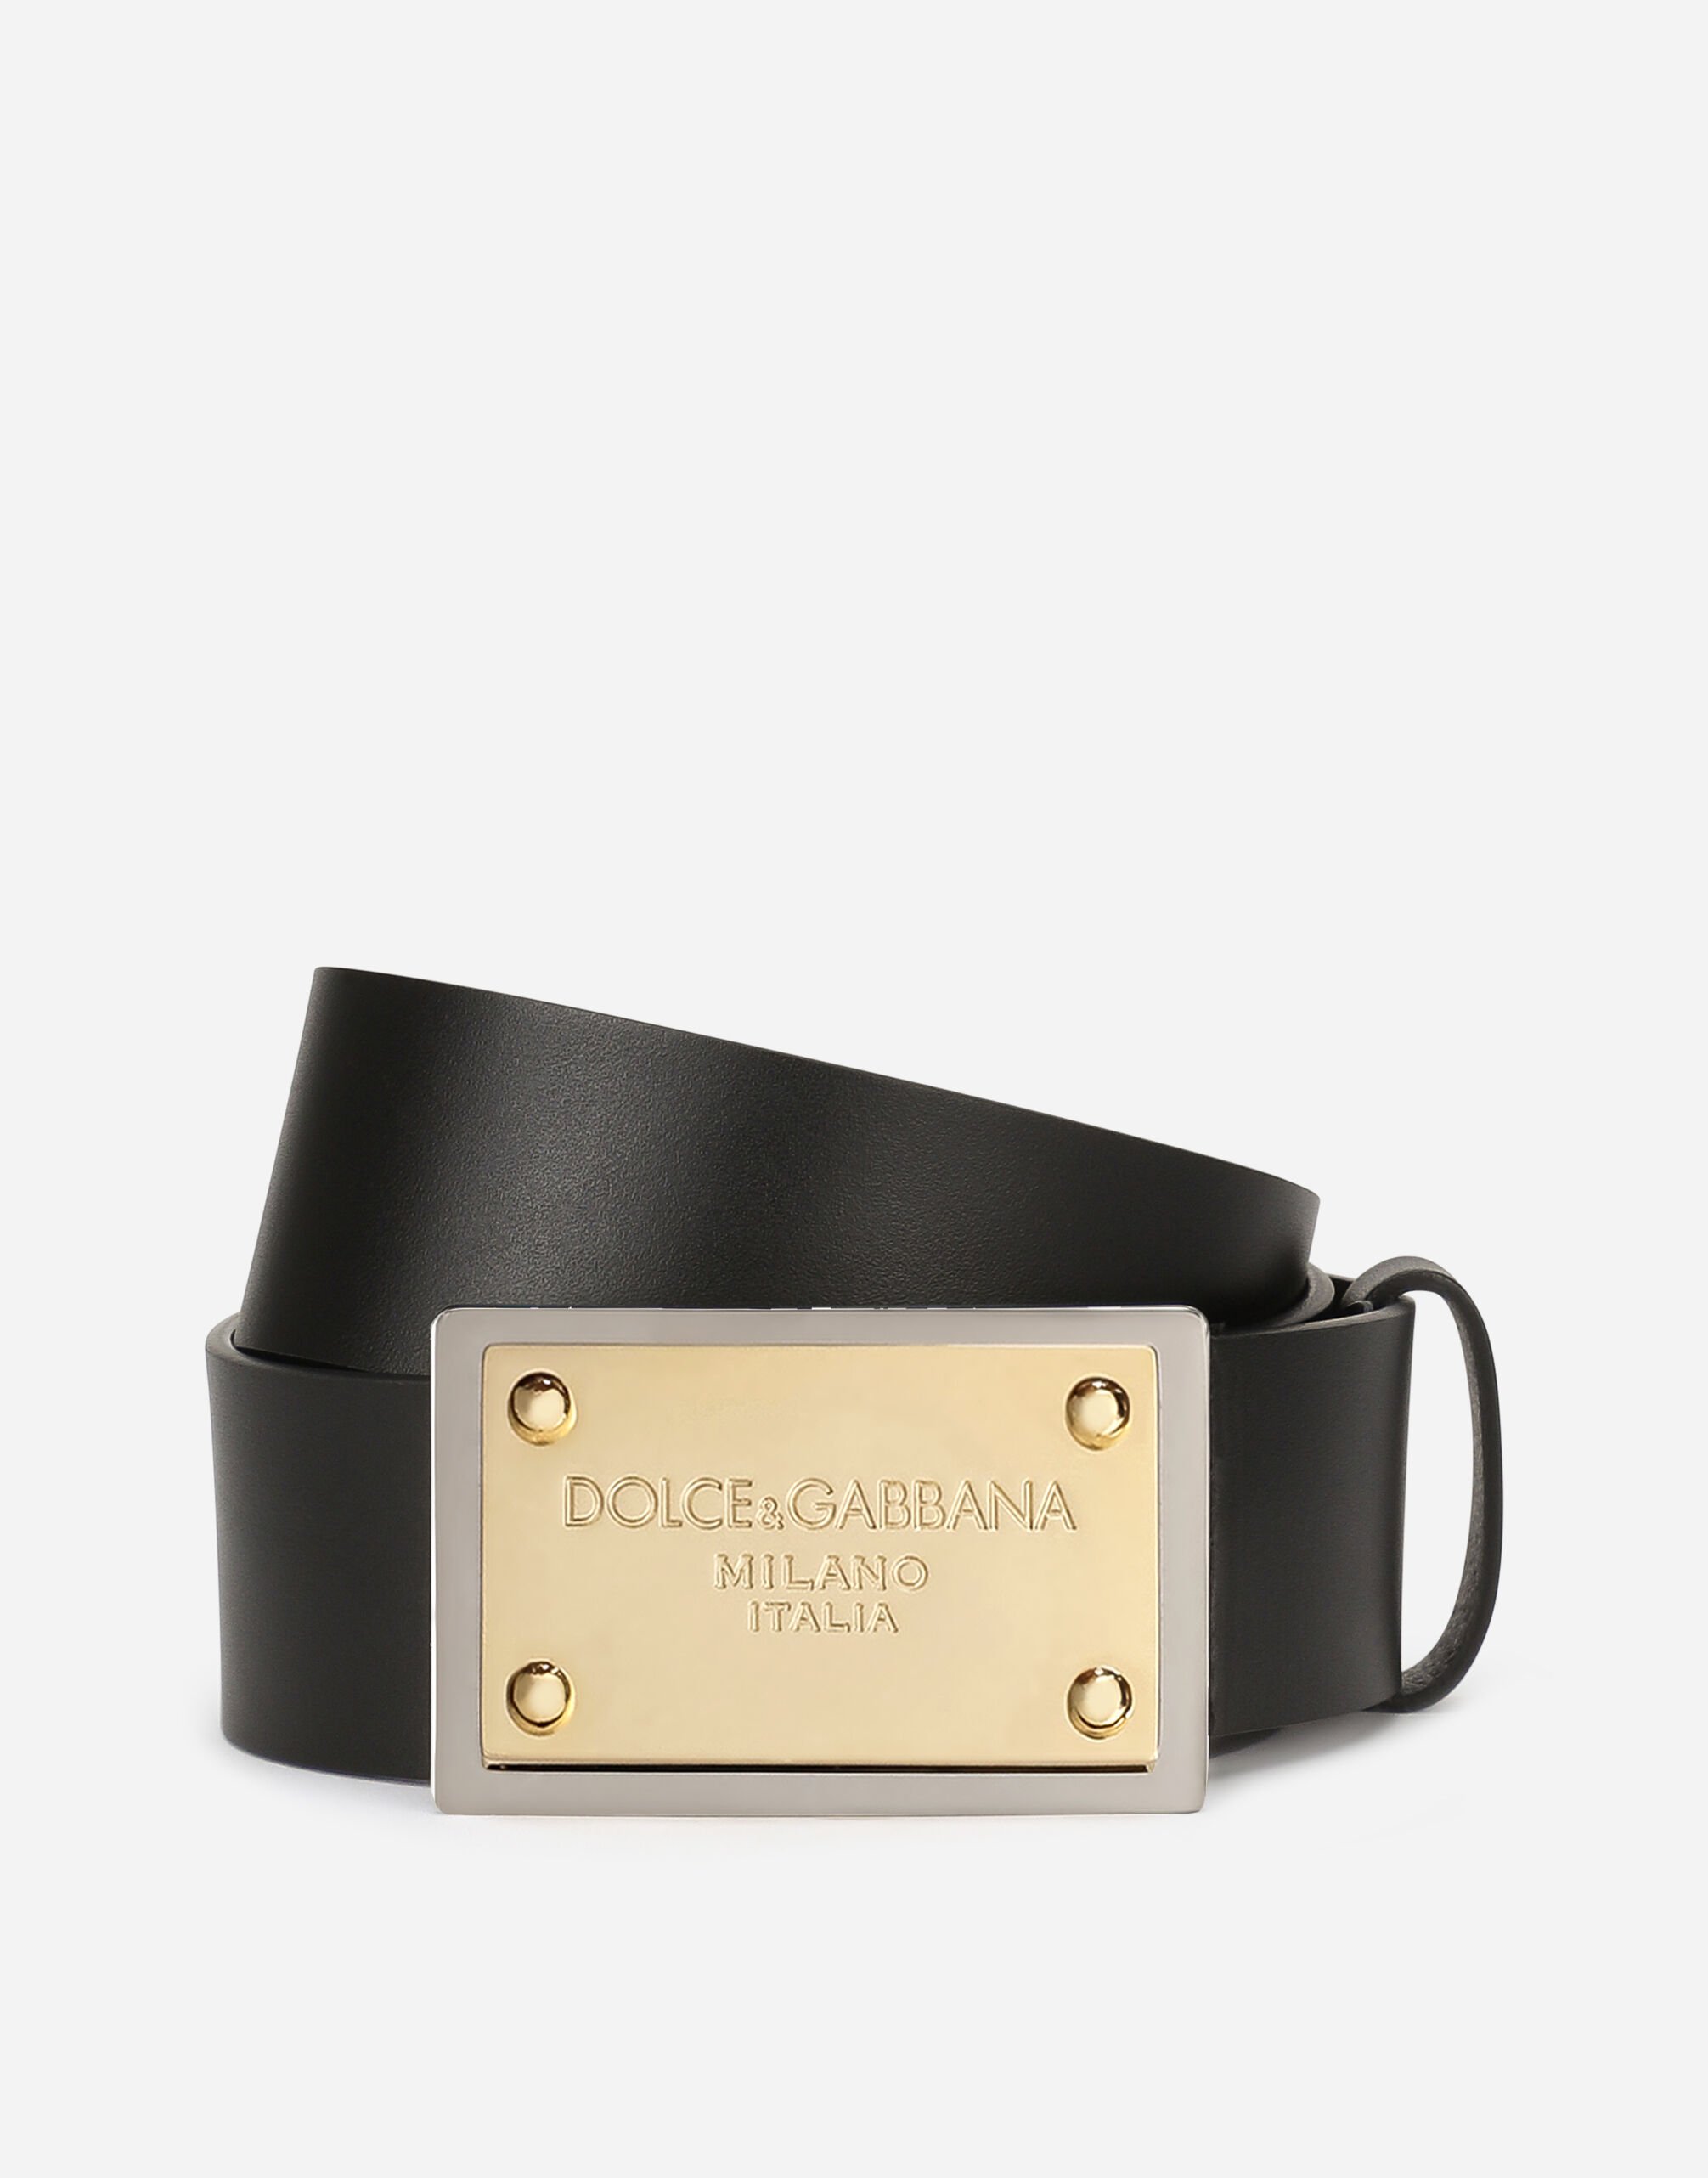 Dolce & Gabbana Lux leather belt with branded buckle Black BC4646AX622